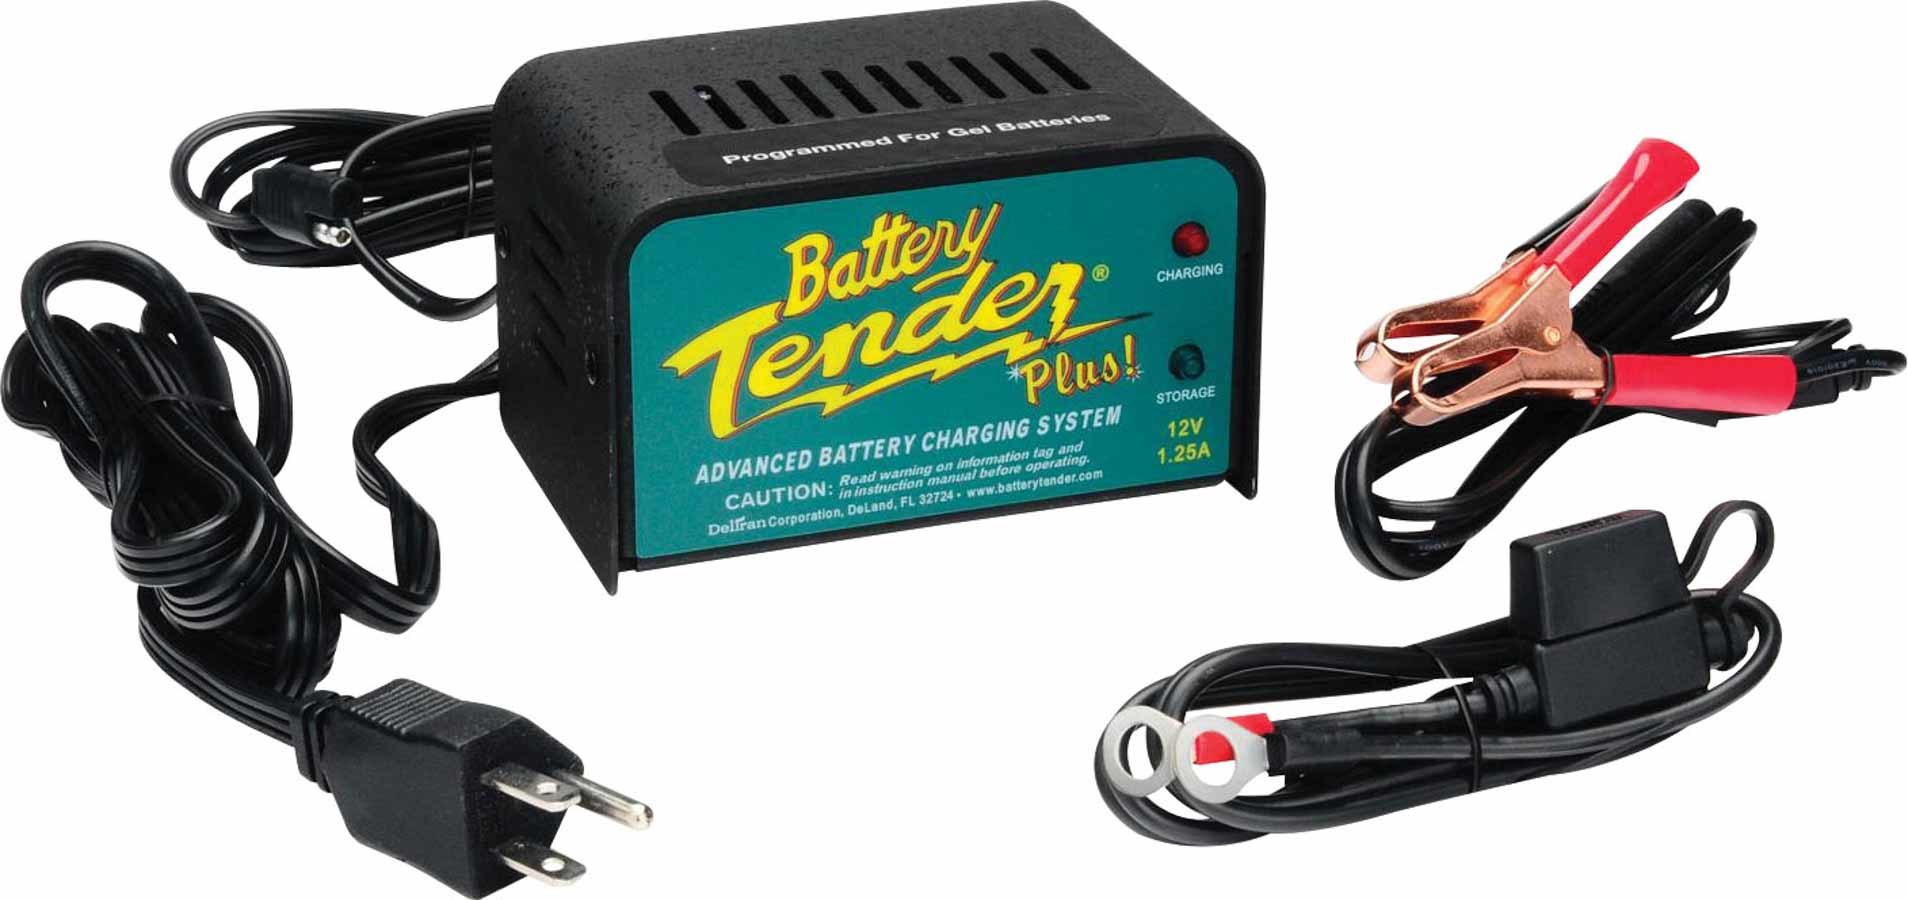 BATTERY TENDER Battery Charger, Battery Tender Plus, 12V, 1.25 amp, 4 Step Charging Program, Quick Connect Harness, Each